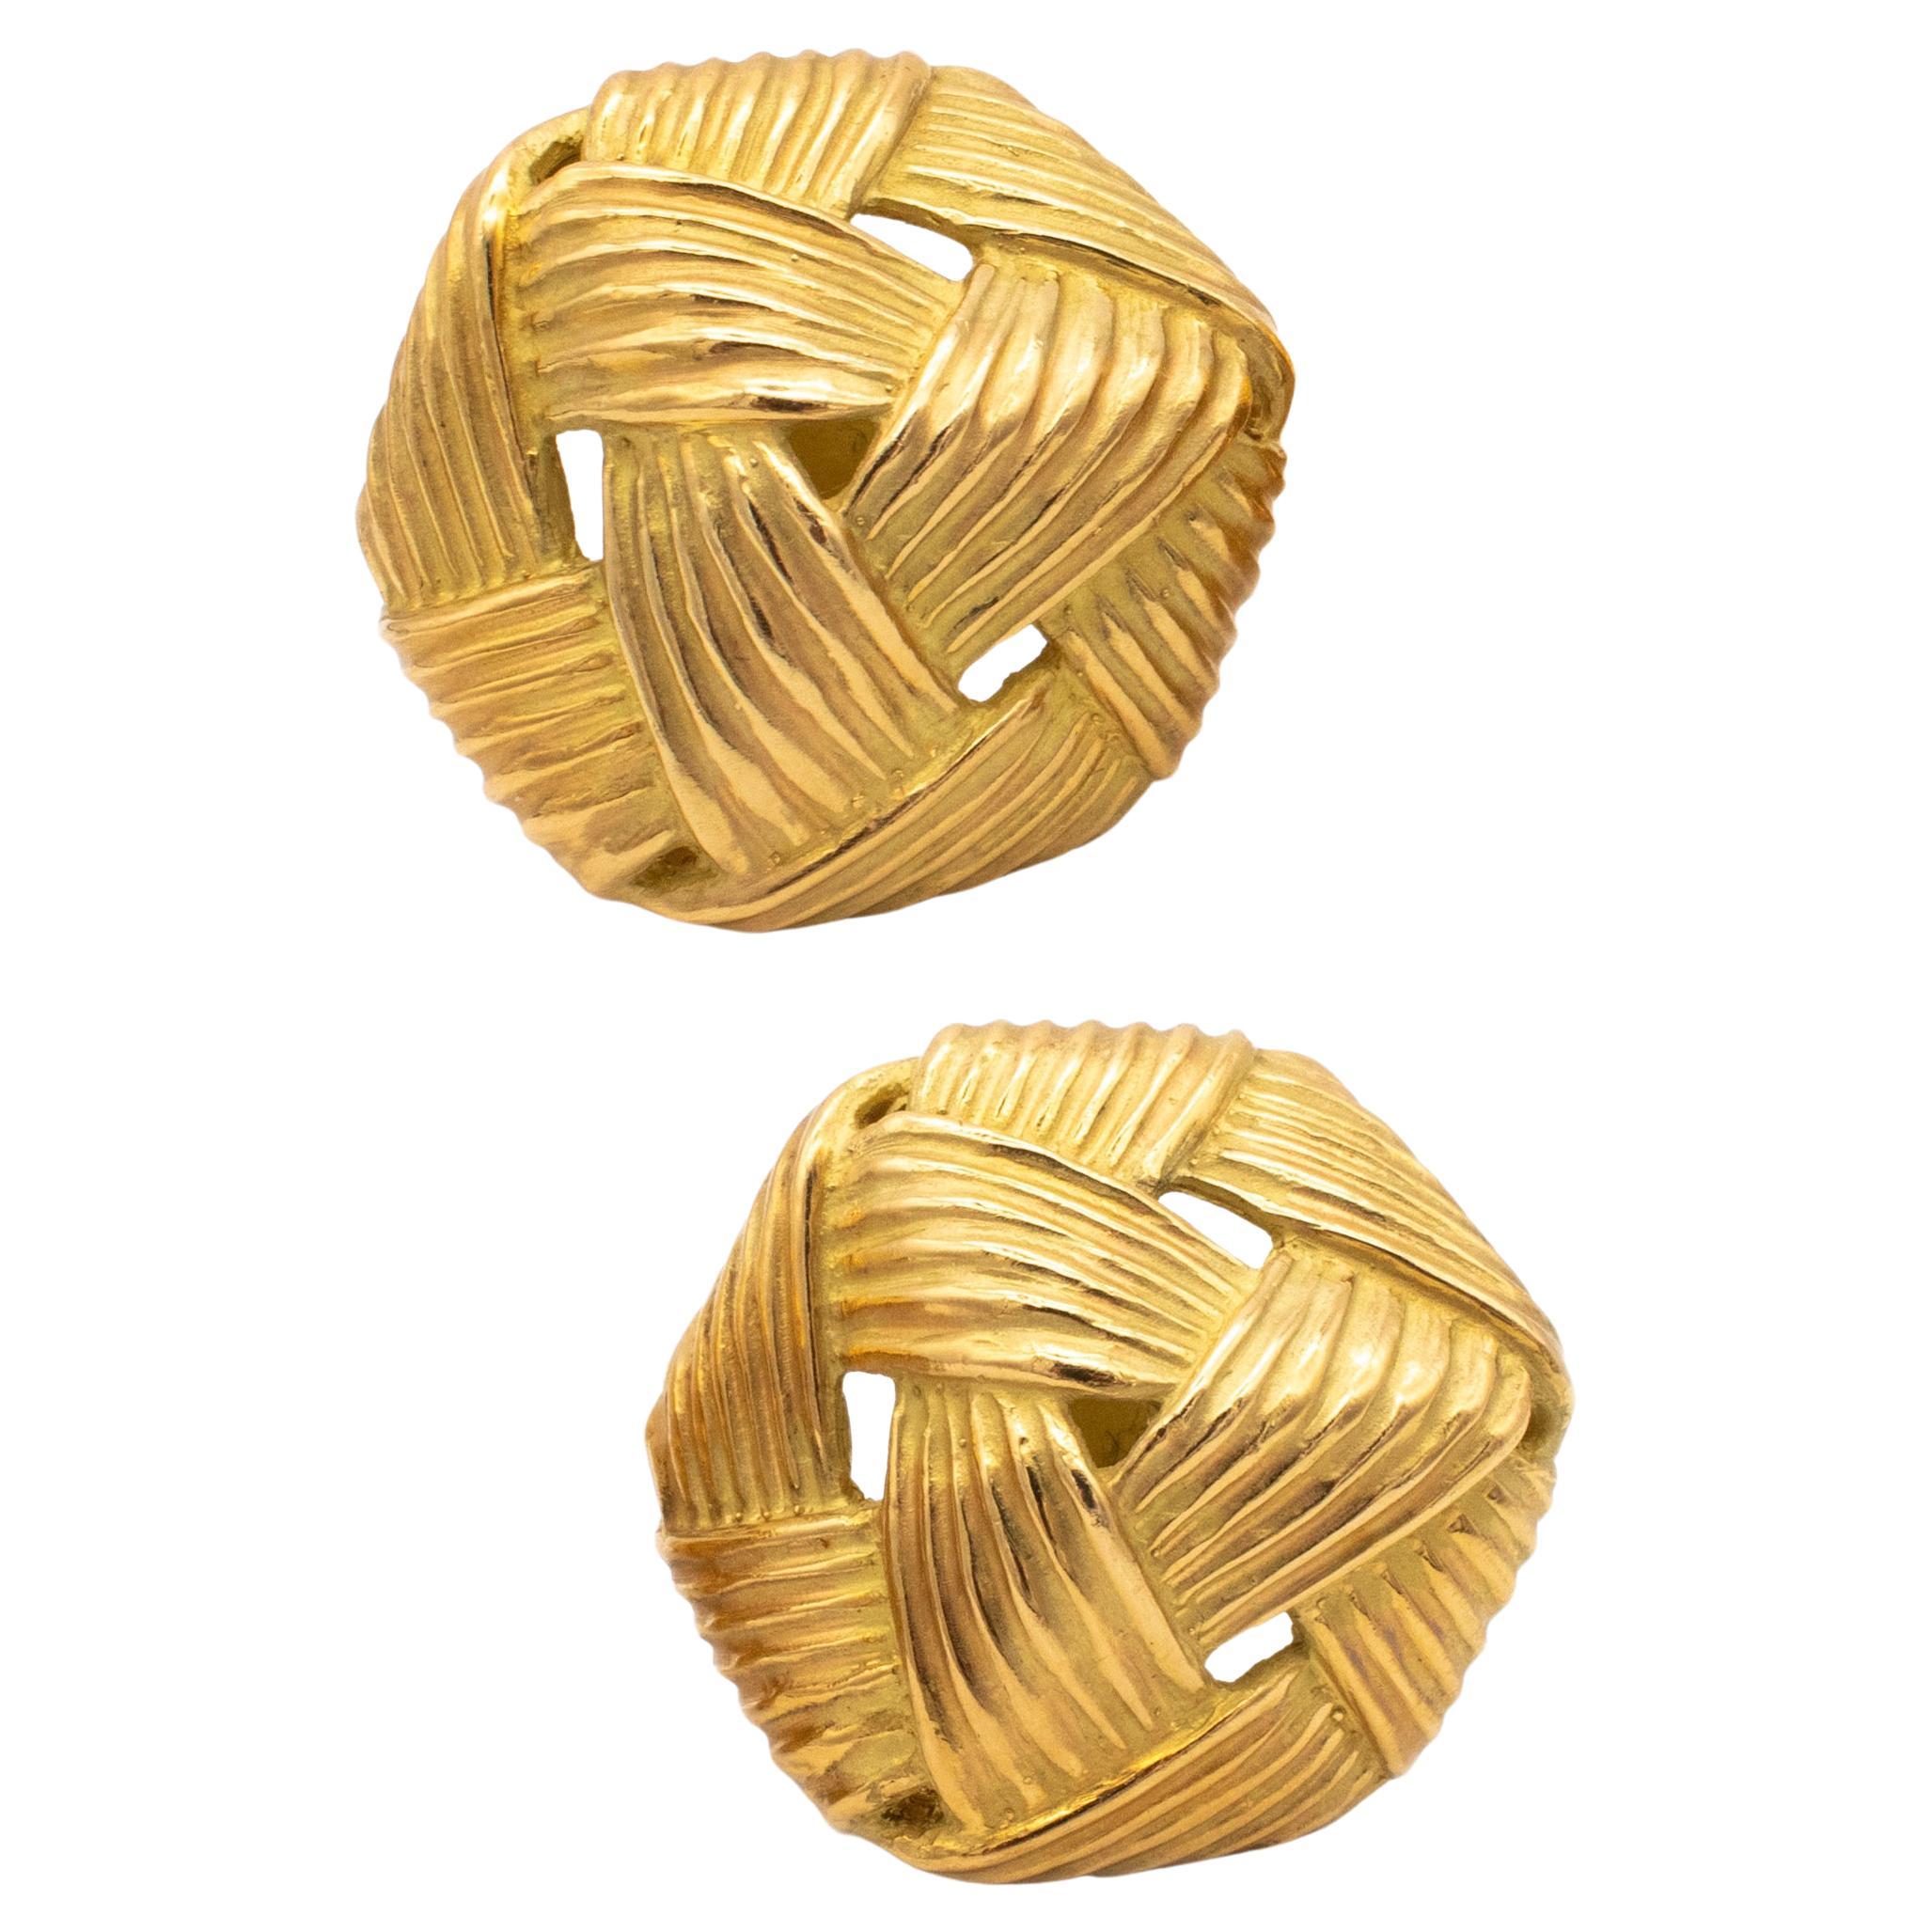 Angela Cummings 1984 Studio Textured Wrapped Earrings in Solid 18Kt Yellow Gold For Sale